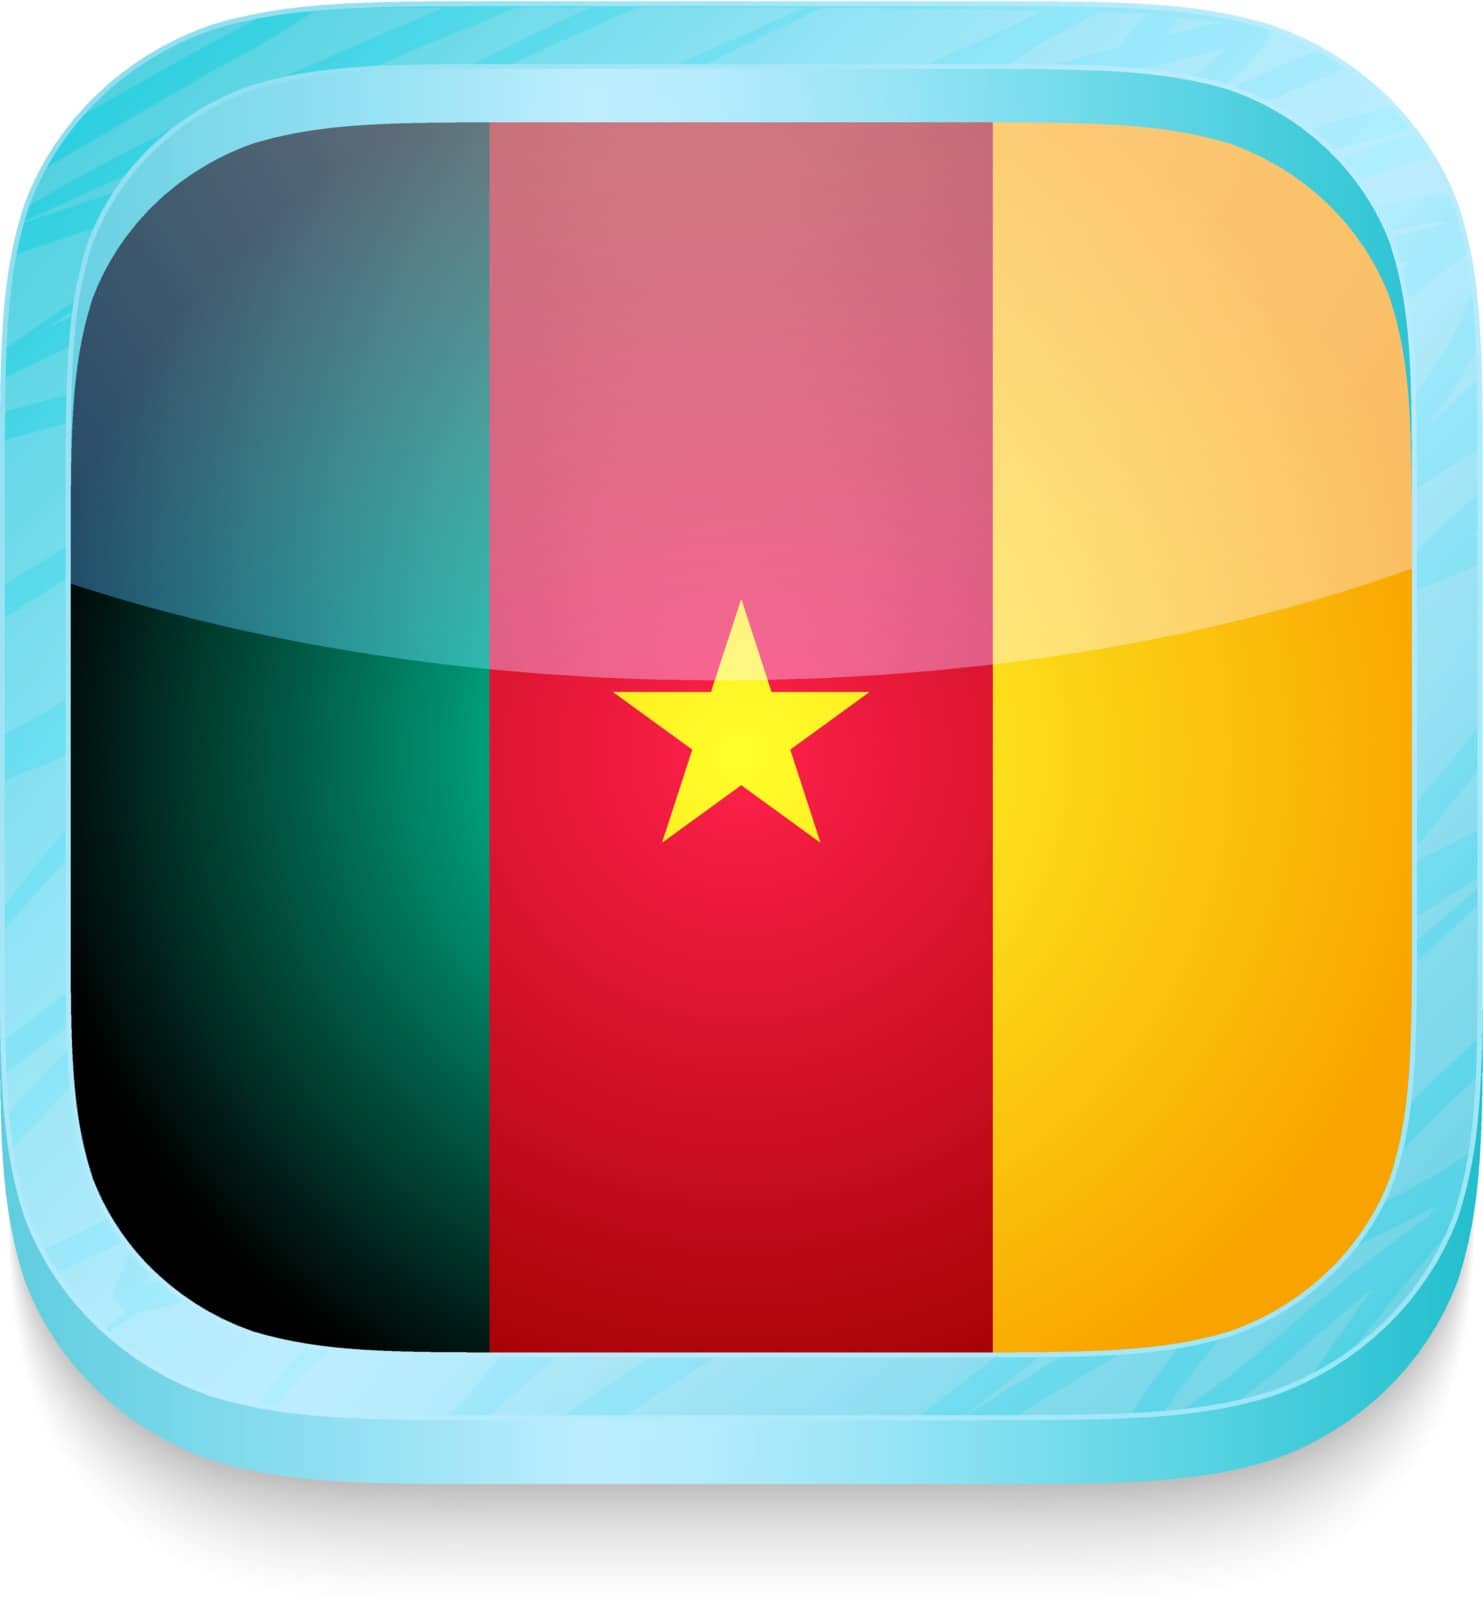 Smart phone button with Cameroon flag